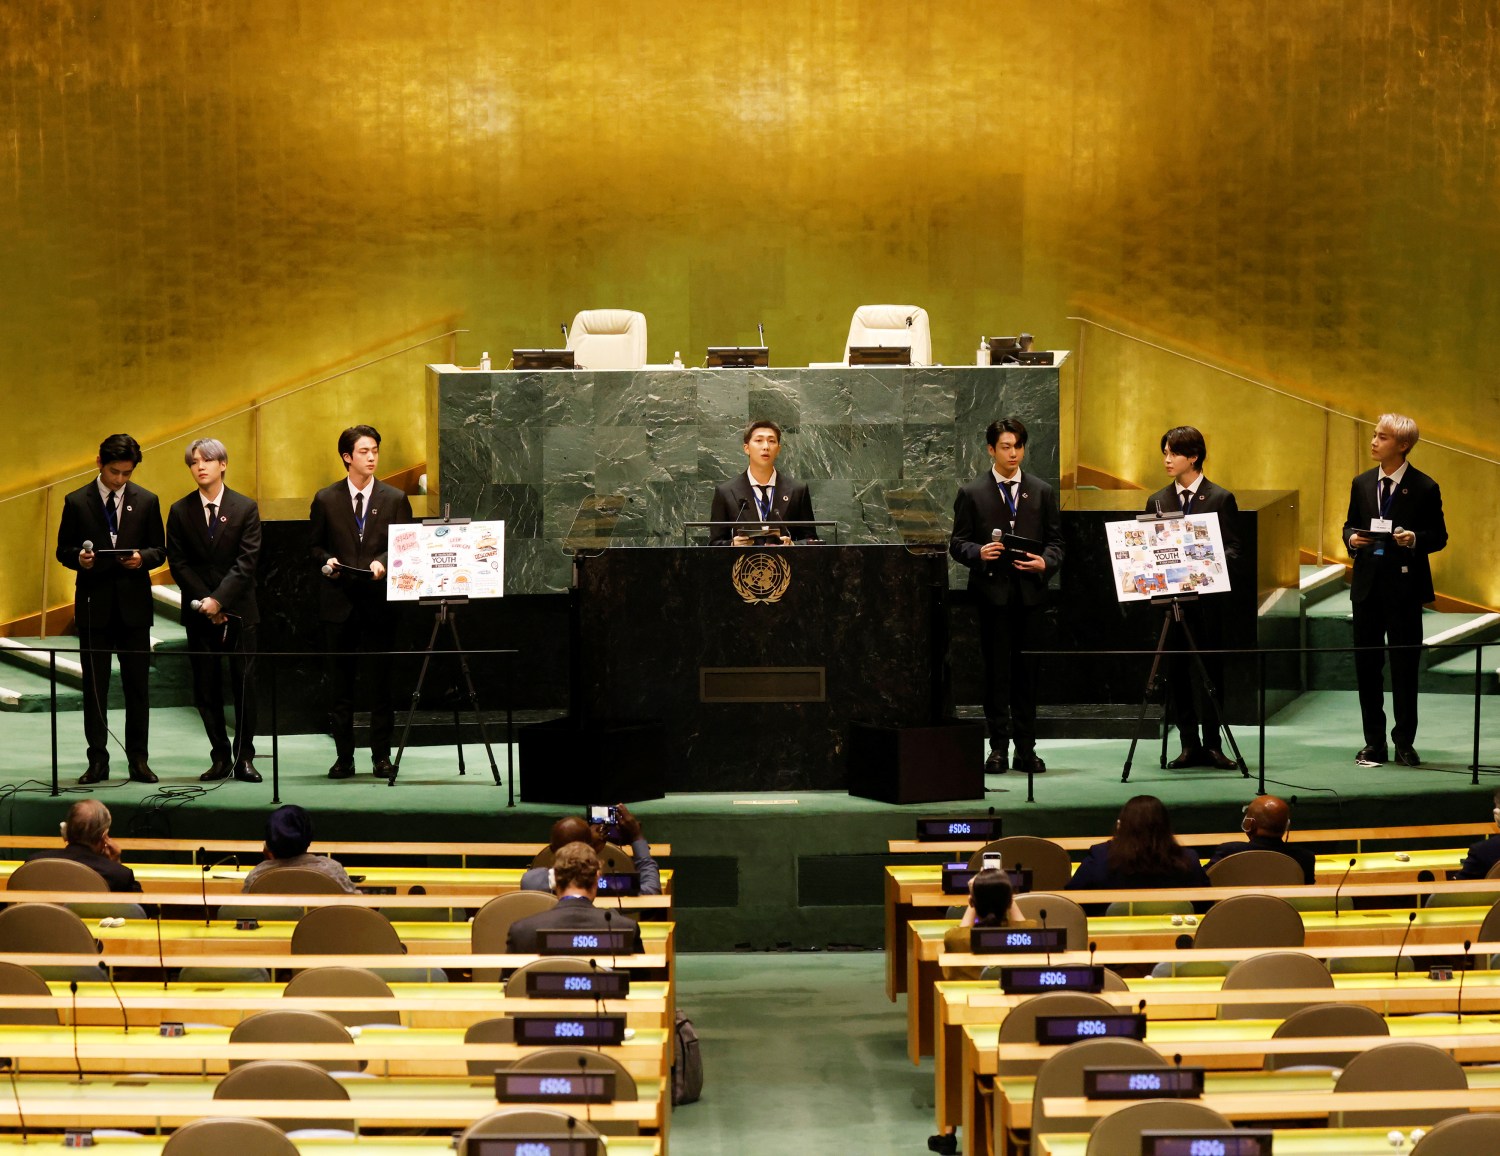 (L to R) Taehyung/V, Suga, Jin, RM, Jungkook, Jimin and J-Hope of South Korean boy band BTS speak at the SDG Moment event as part of the UN General Assembly 76th session General Debate in UN General Assembly Hall at the United Nations Headquarters, in New York, U.S., September 20, 2021. John Angelillo/Pool via REUTERS